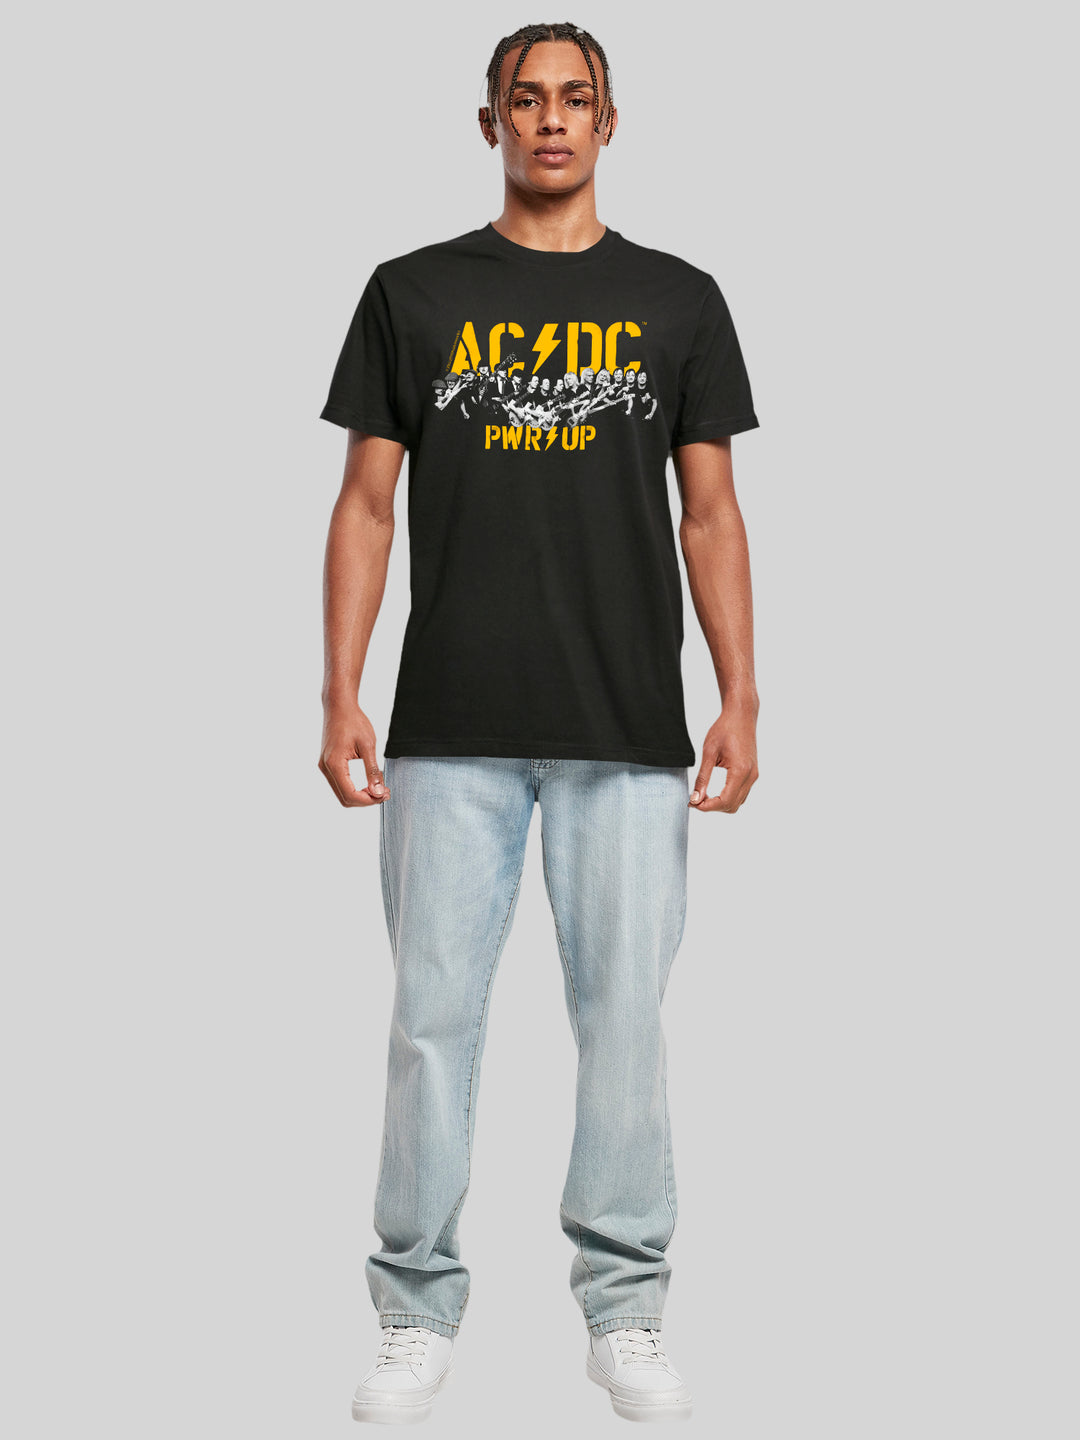 ACDC PWRUP Portrait Motion with T-Shirt Round Neck